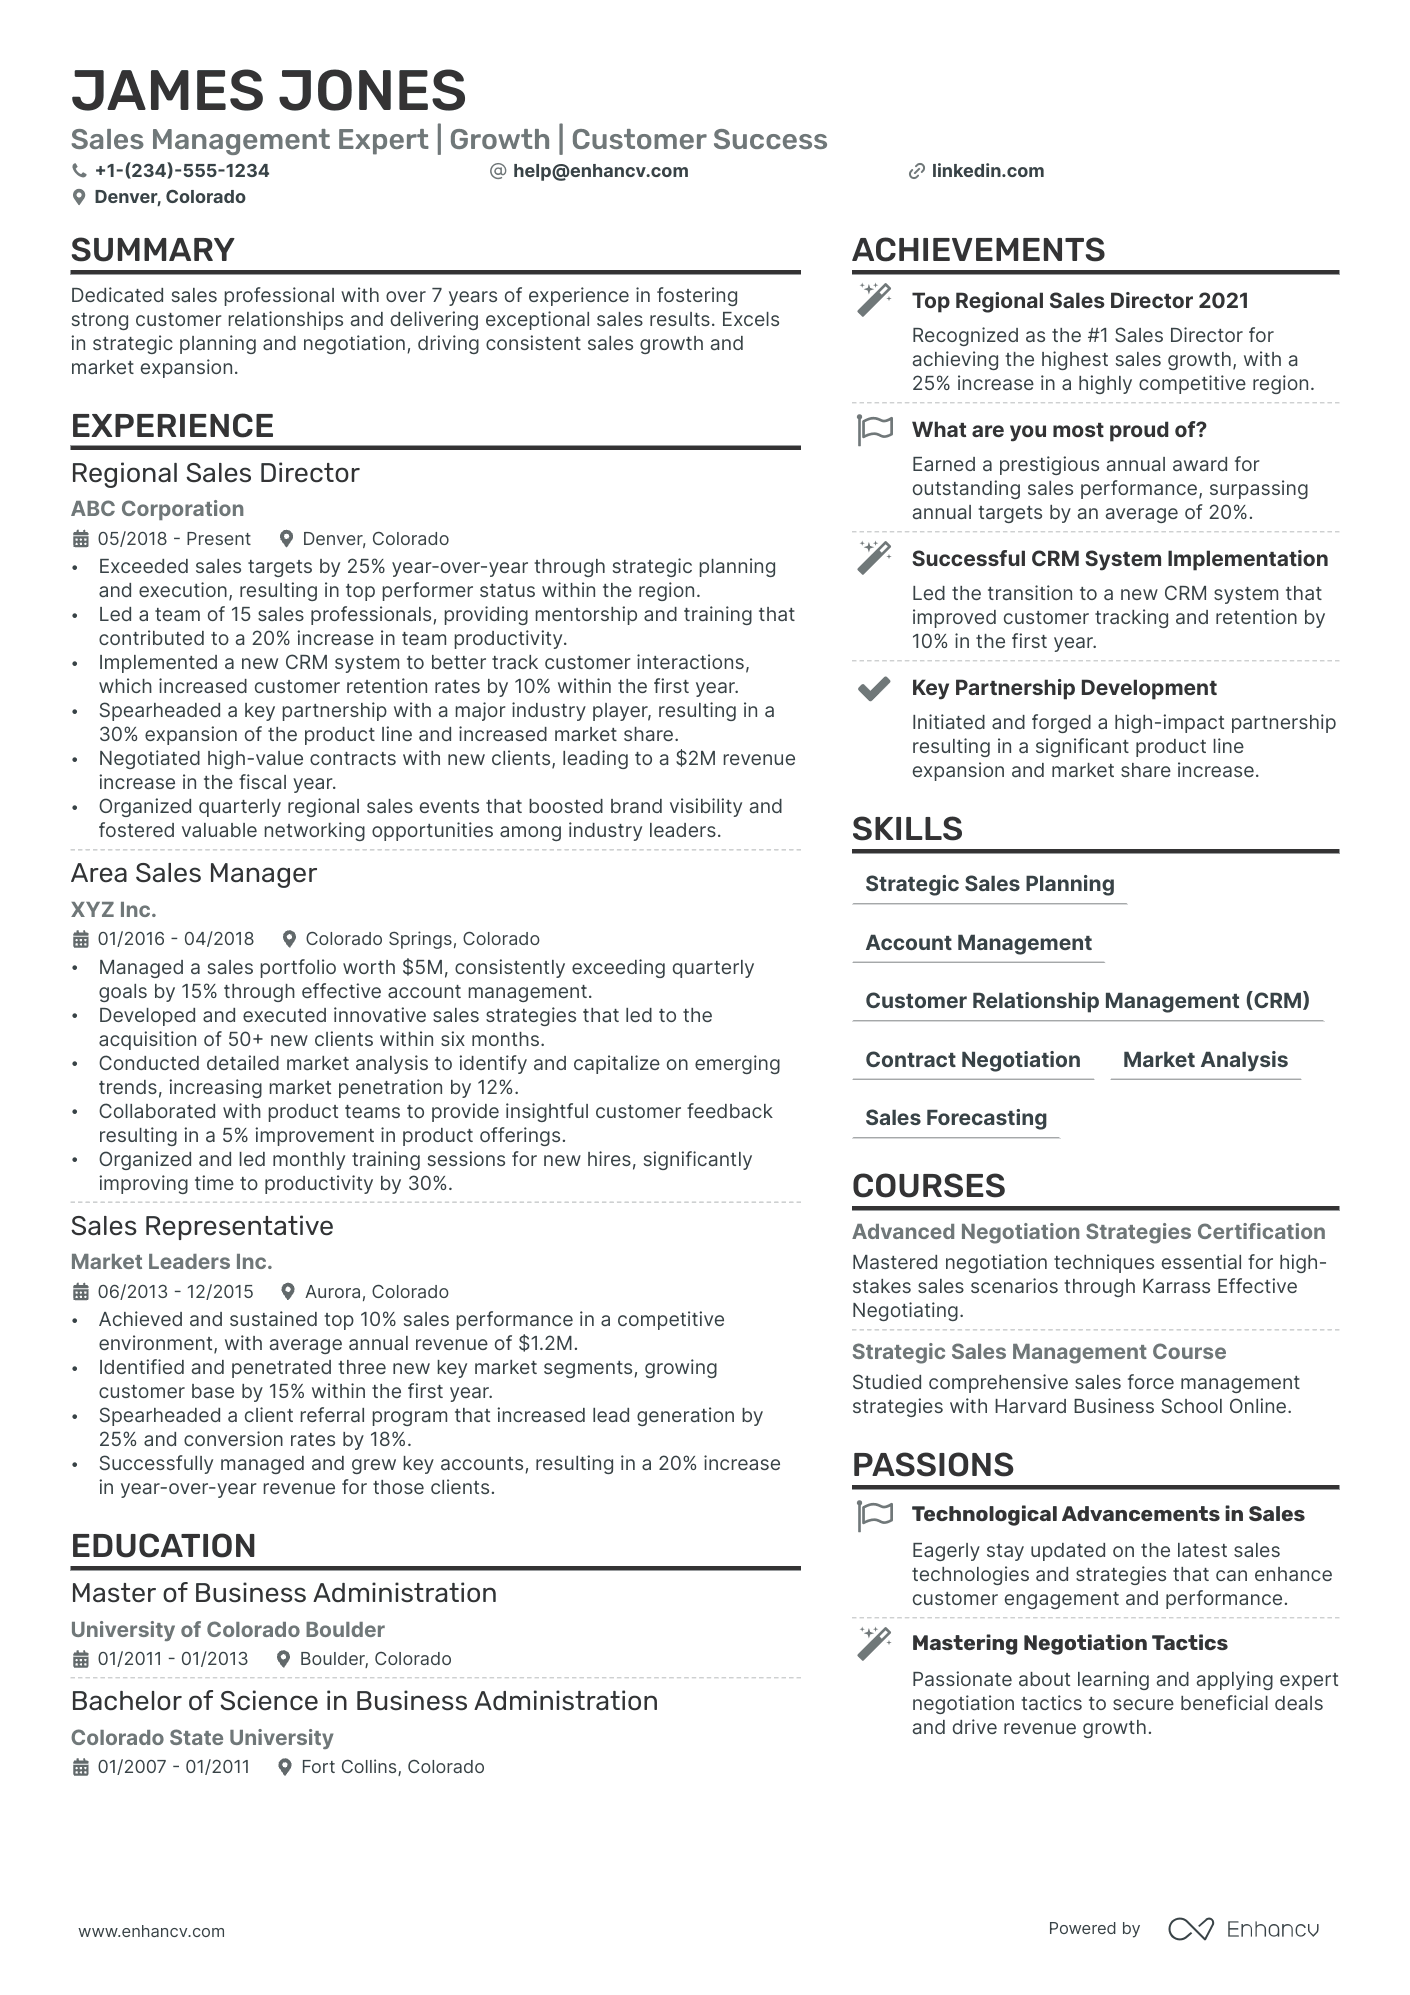 Territory Sales Manager resume example